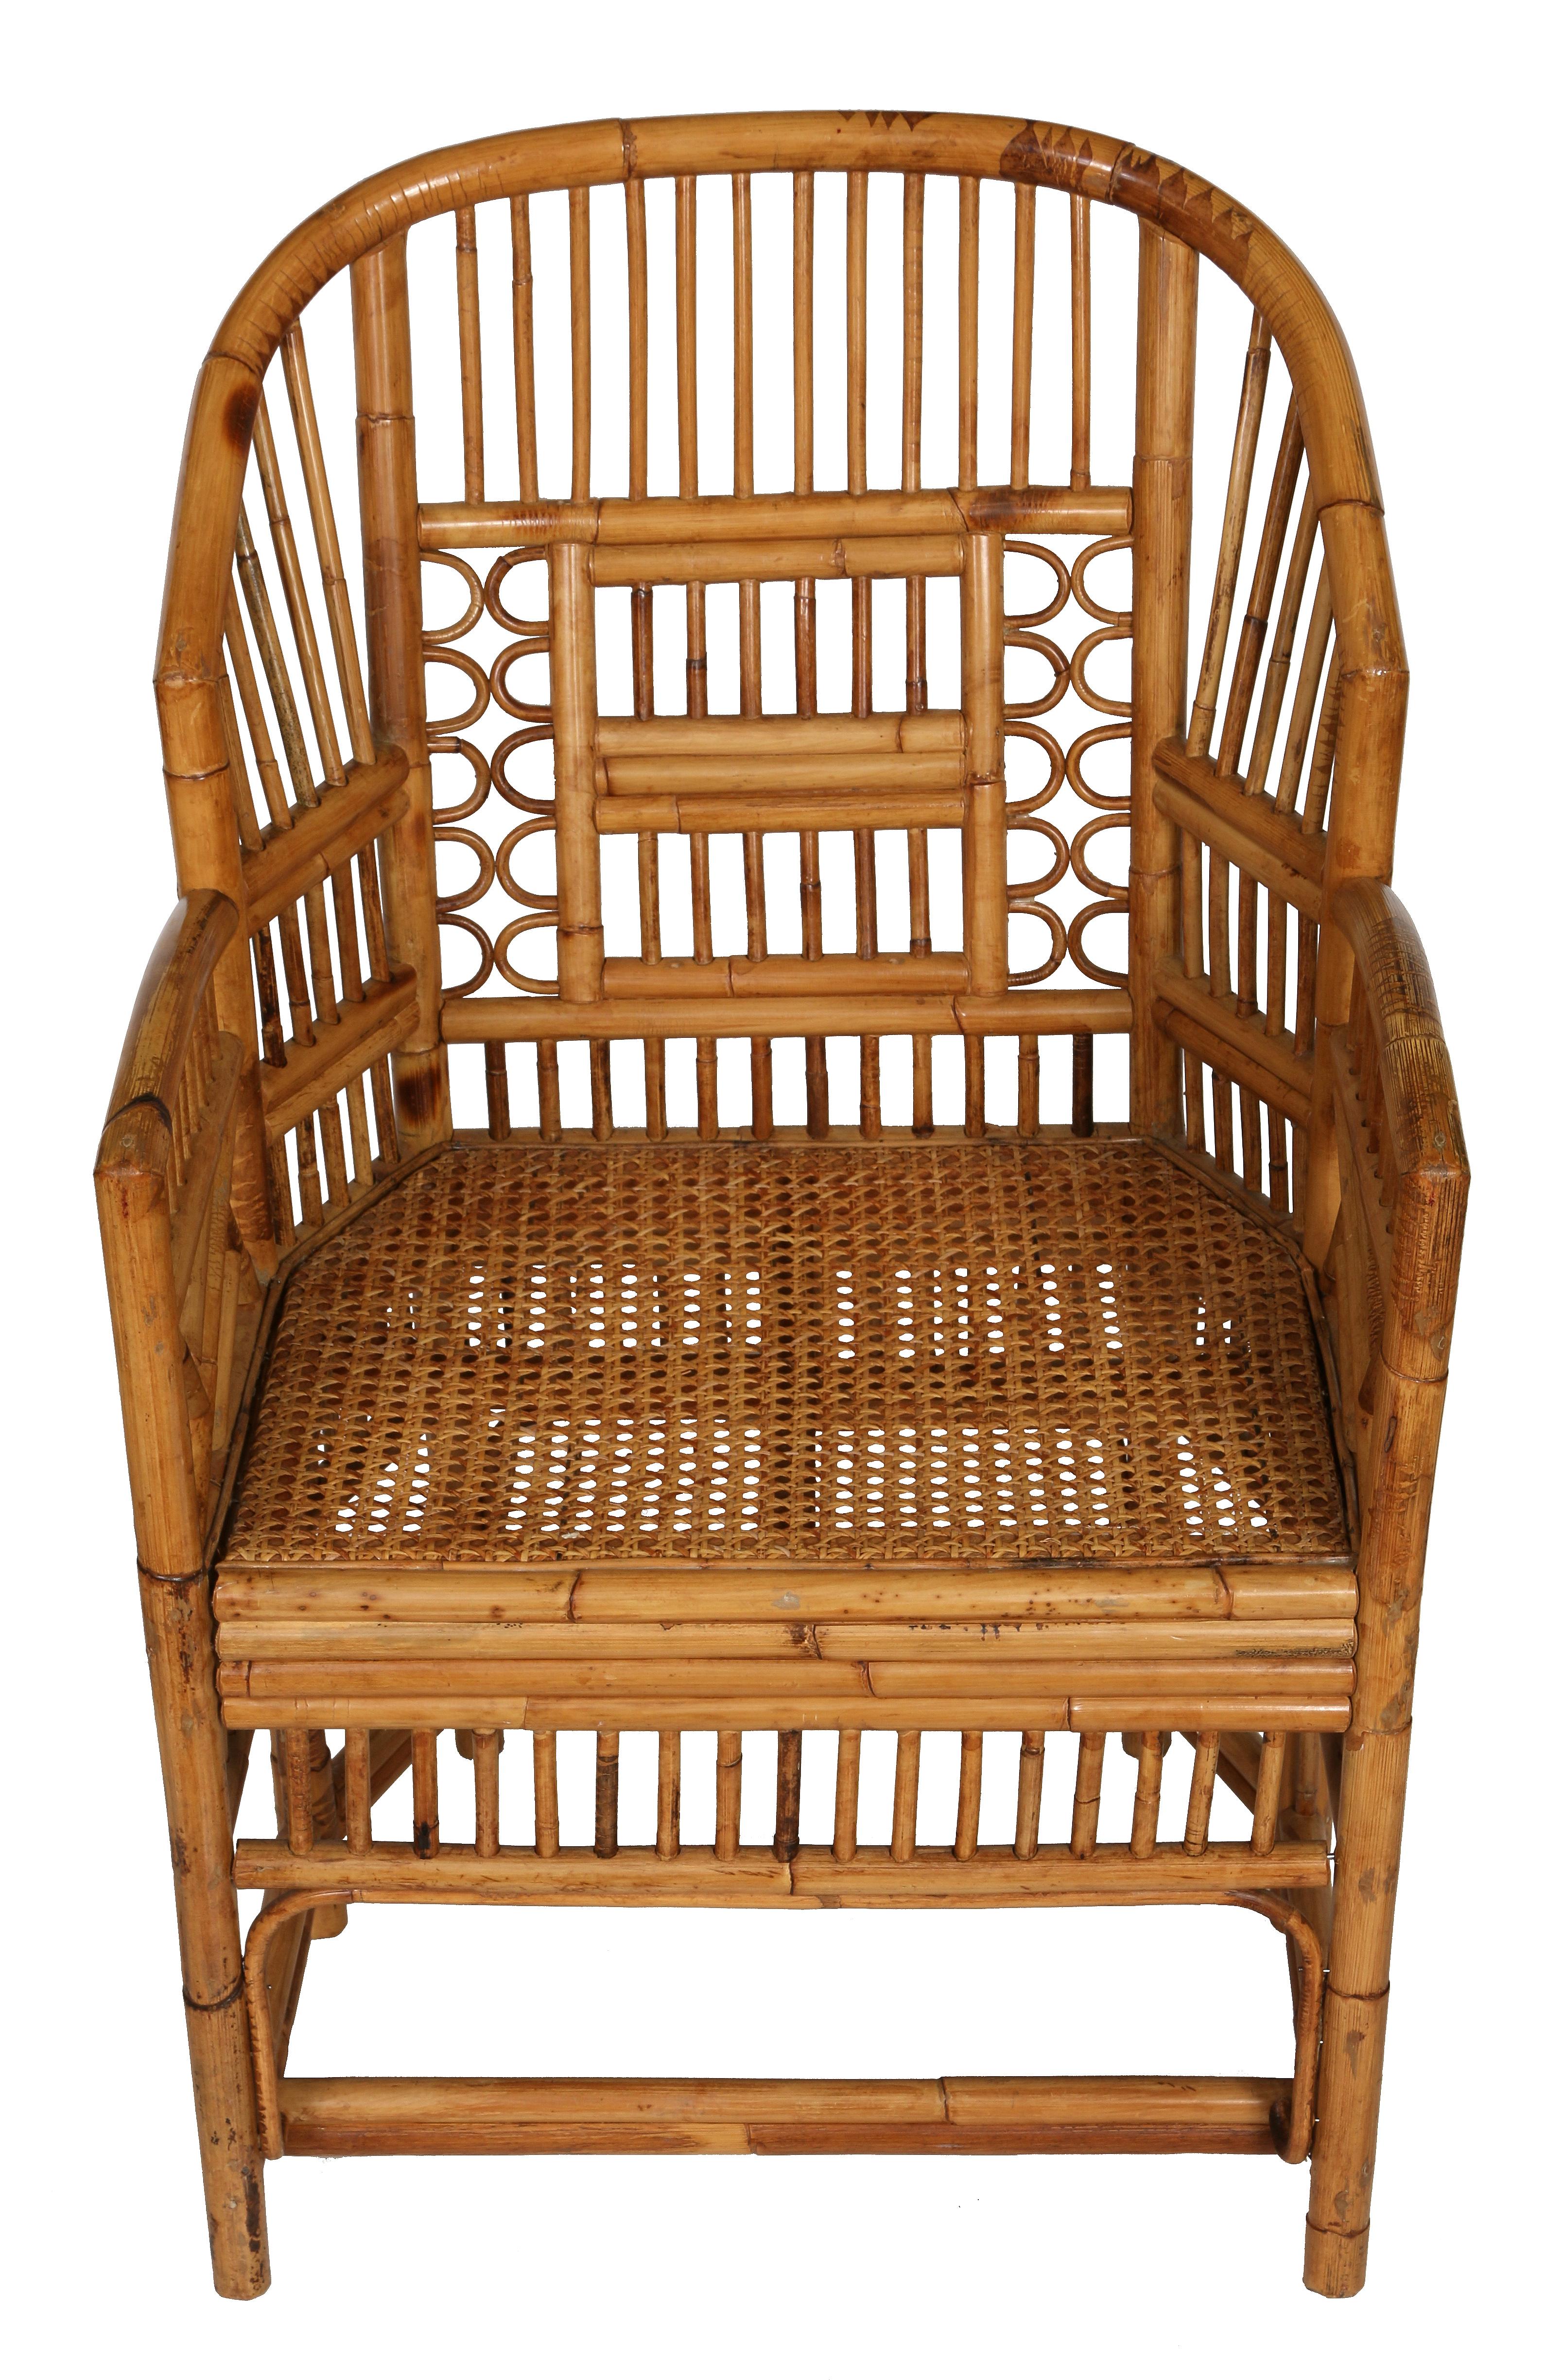 These fabulous chairs evoke a spirit of exotic places and lazy days on the veranda! Solidly constructed, the chairs feature a faux bamboo frame and a caned seat. They can be used with or without a seat cushion.